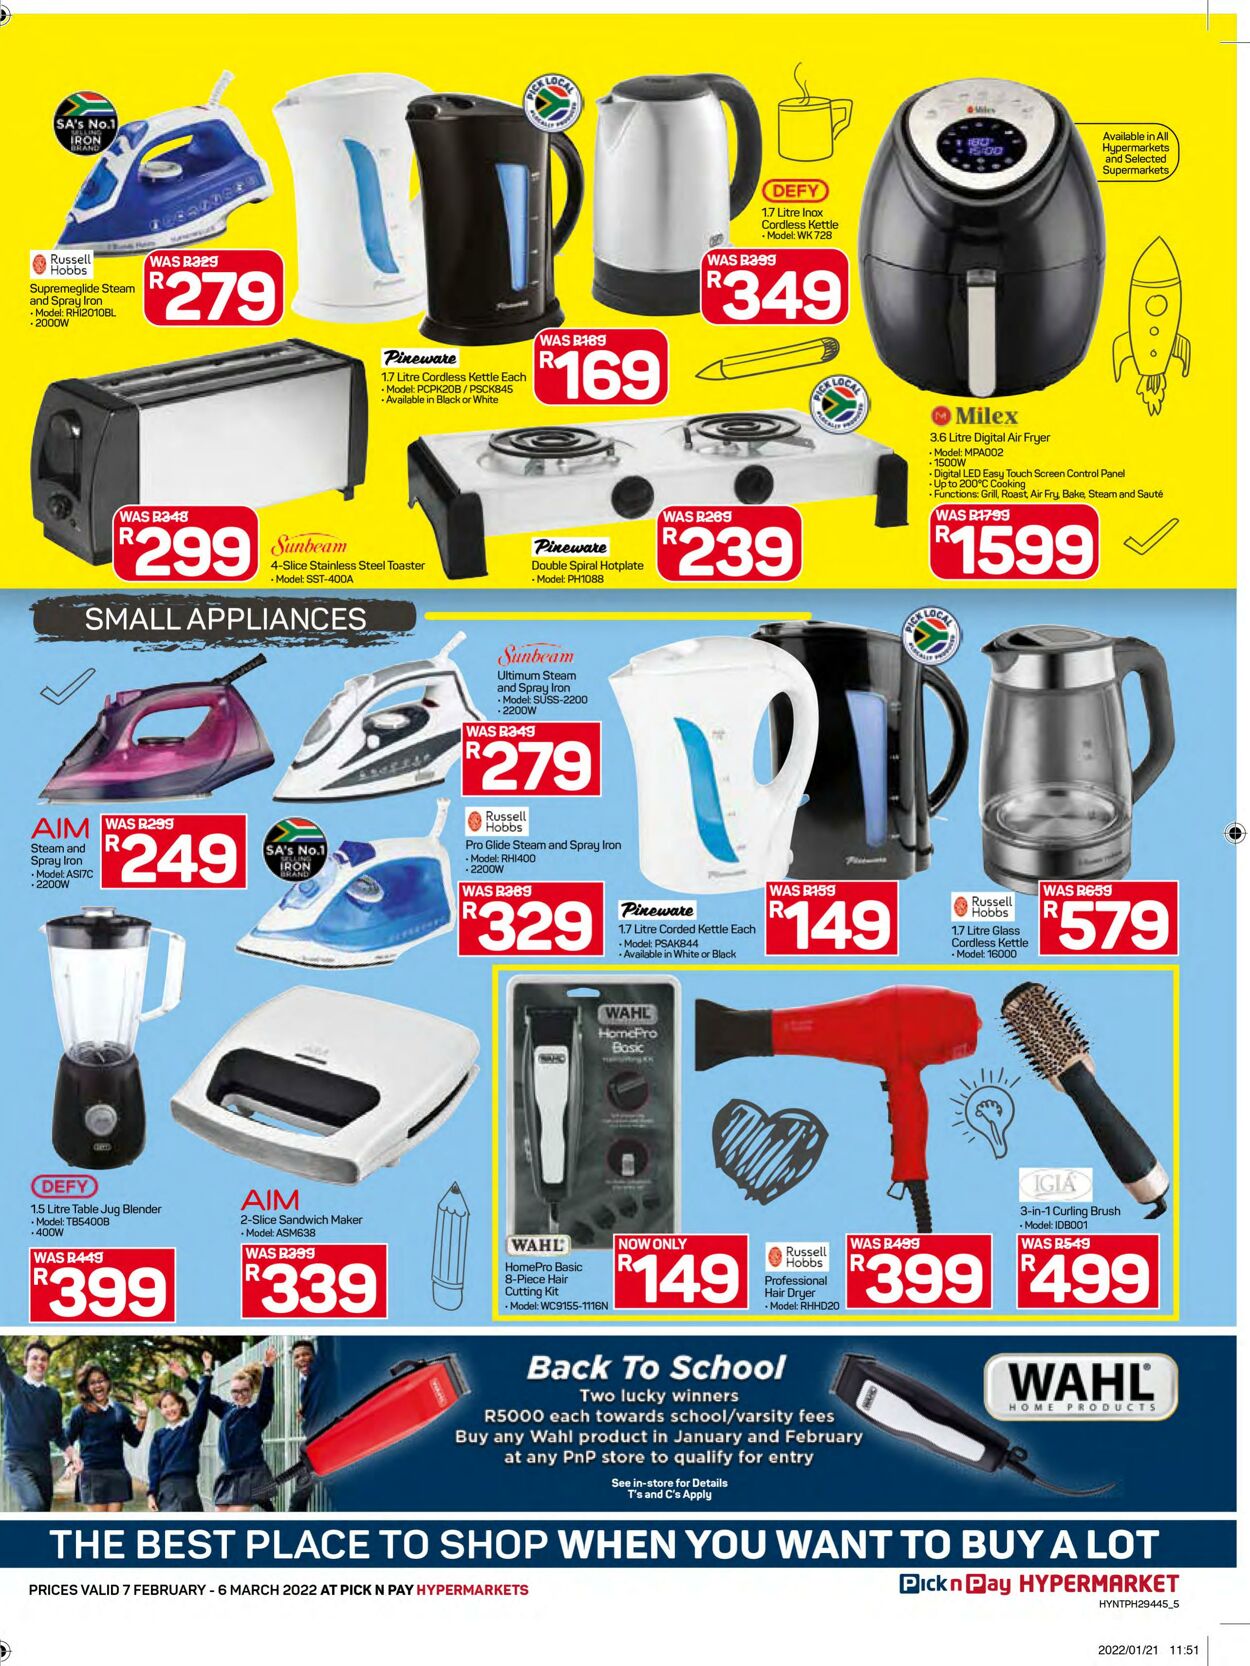 Special Pick n Pay 07.02.2022 - 06.03.2022